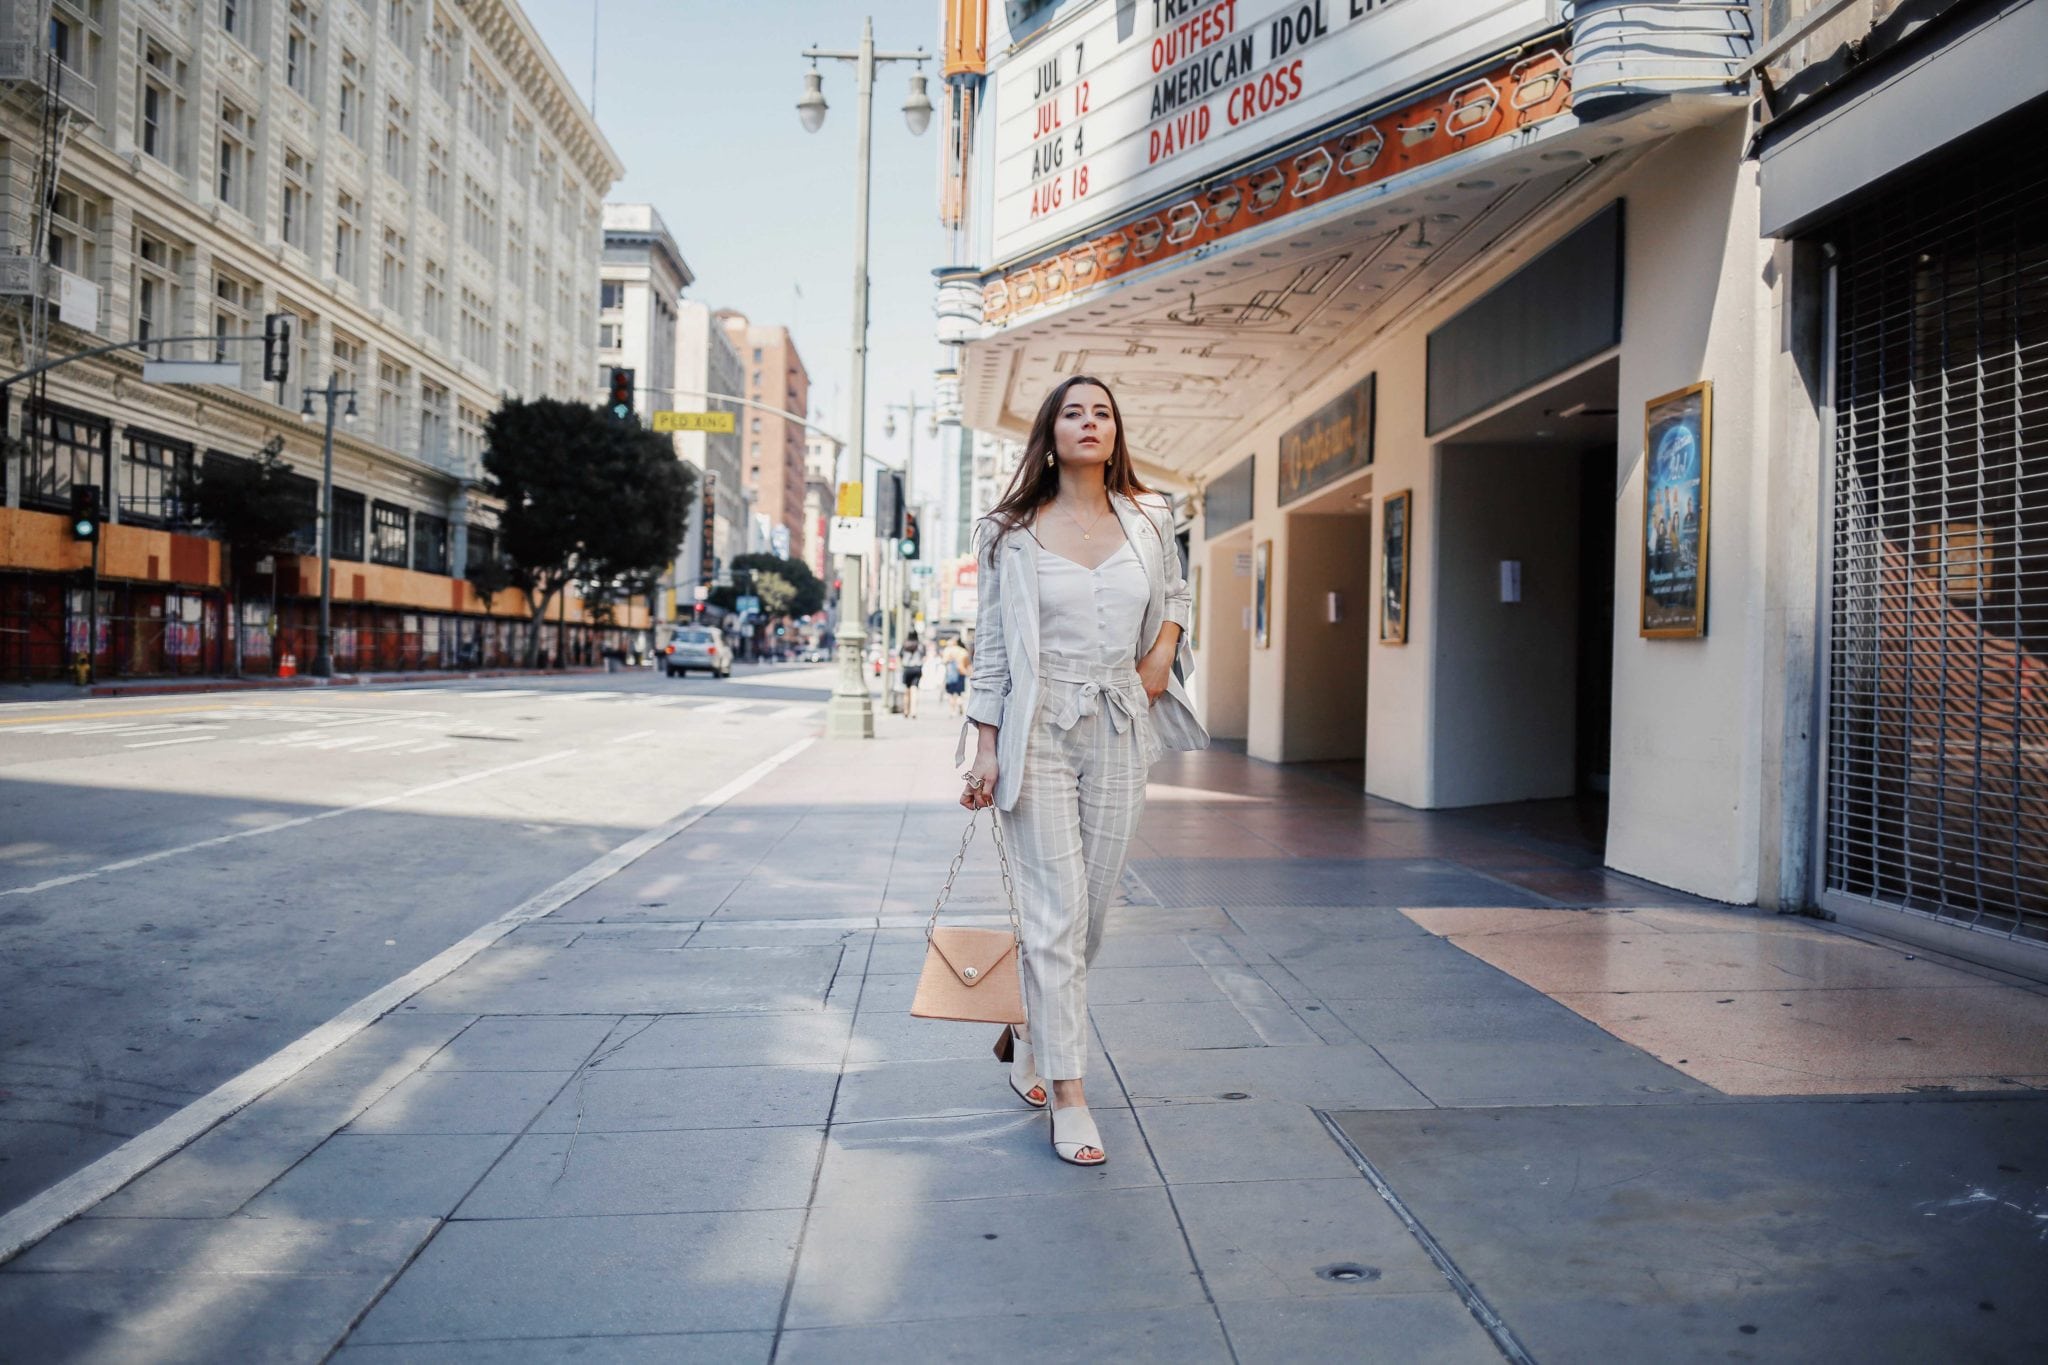 How to style linen for Summer - The linen suits for work and the bardot dress from River Island. Summer style - Read this post for summer outfit ideas using linen fabric. More on modersvp.com by fashion blogger Julia Comil